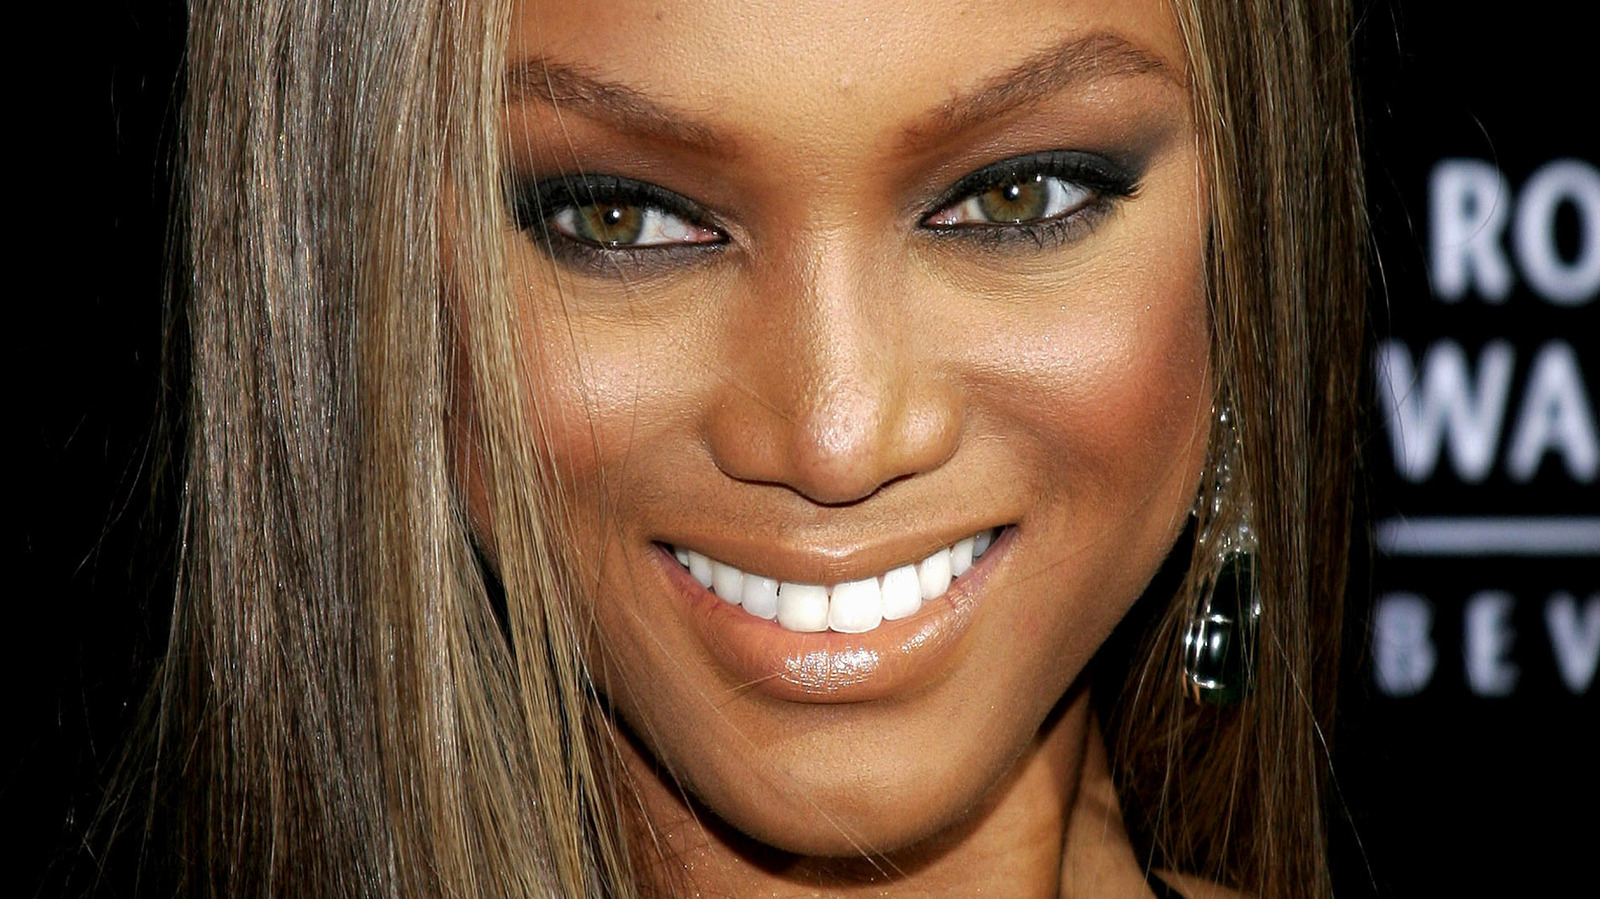 Tyra Banks looks more confident than ever posing in Kim